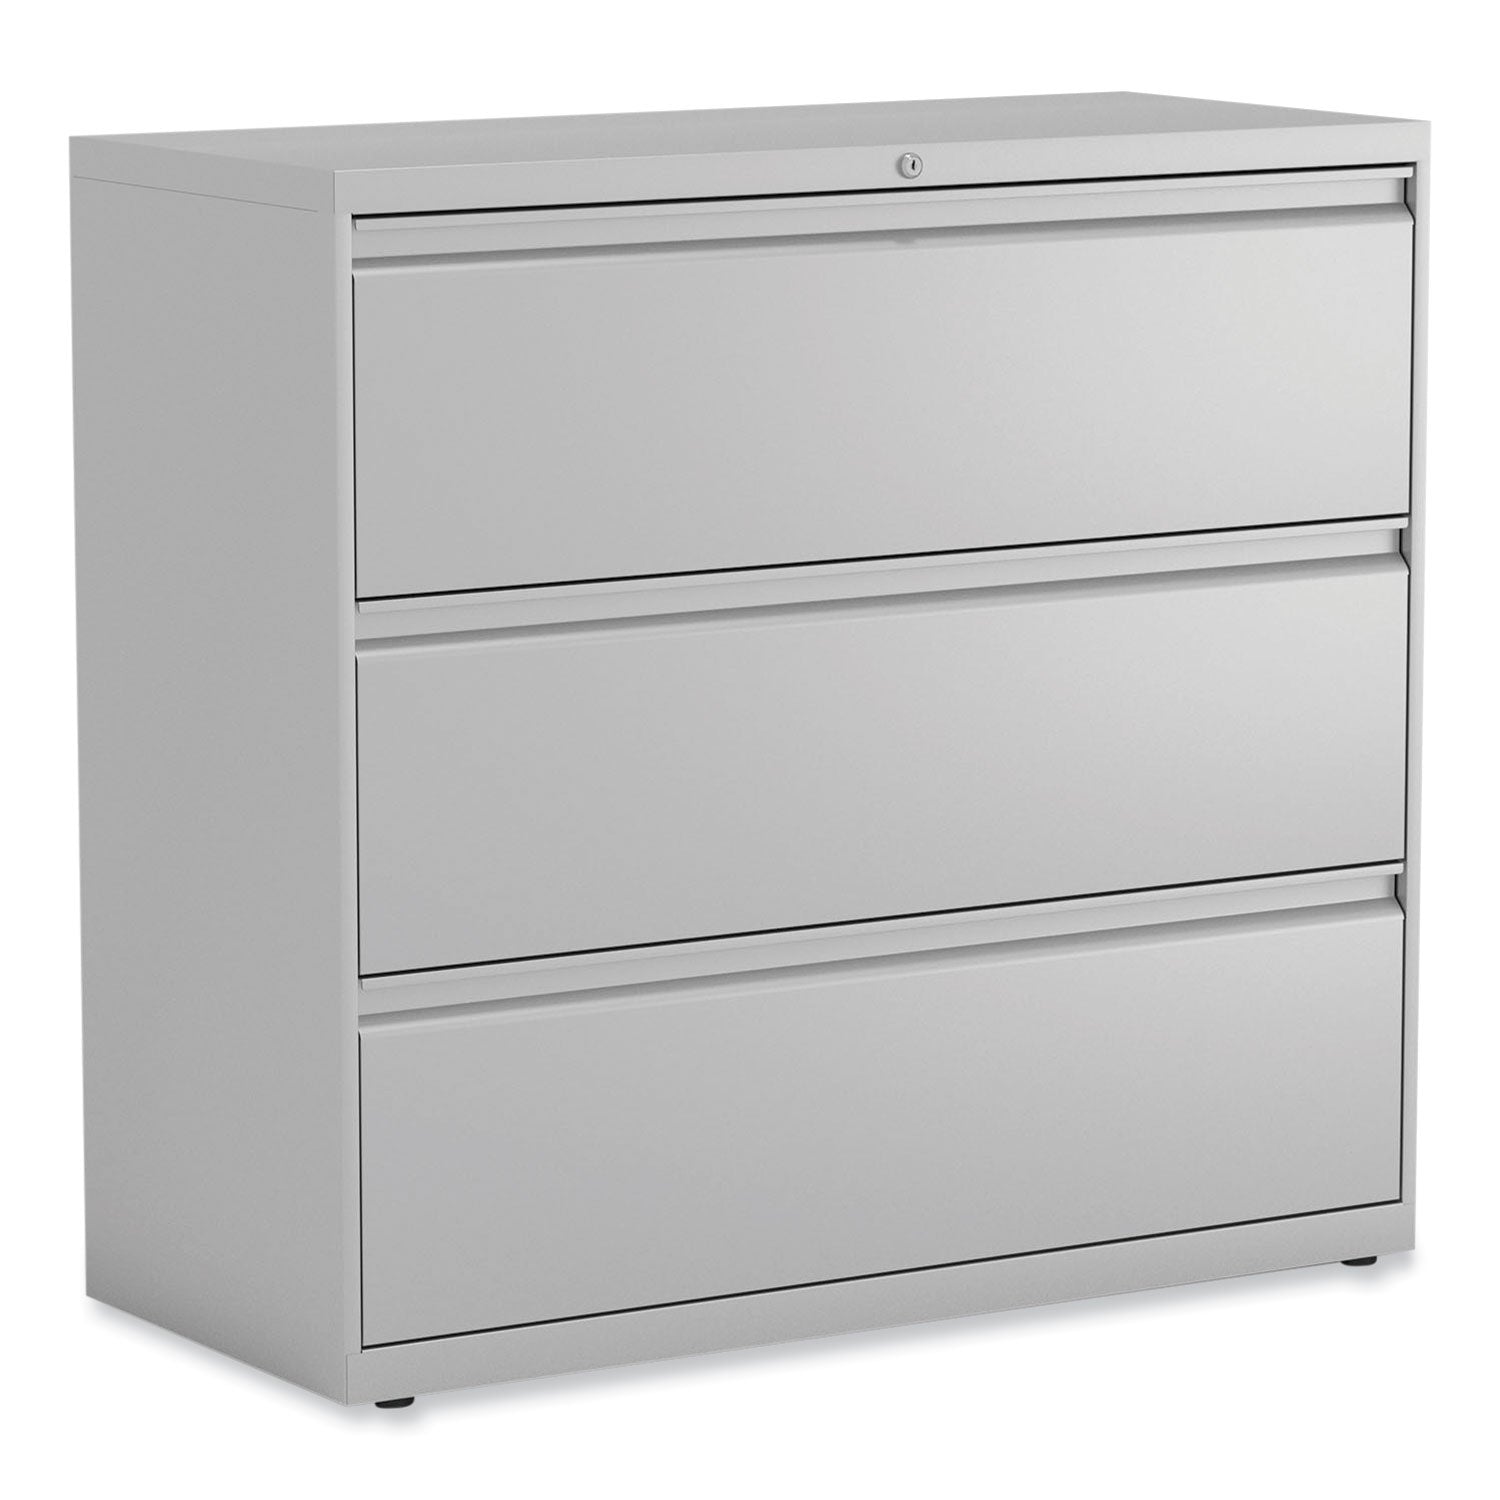 lateral-file-3-legal-letter-a4-a5-size-file-drawers-light-gray-42-x-1863-x-4025_alehlf4241lg - 1